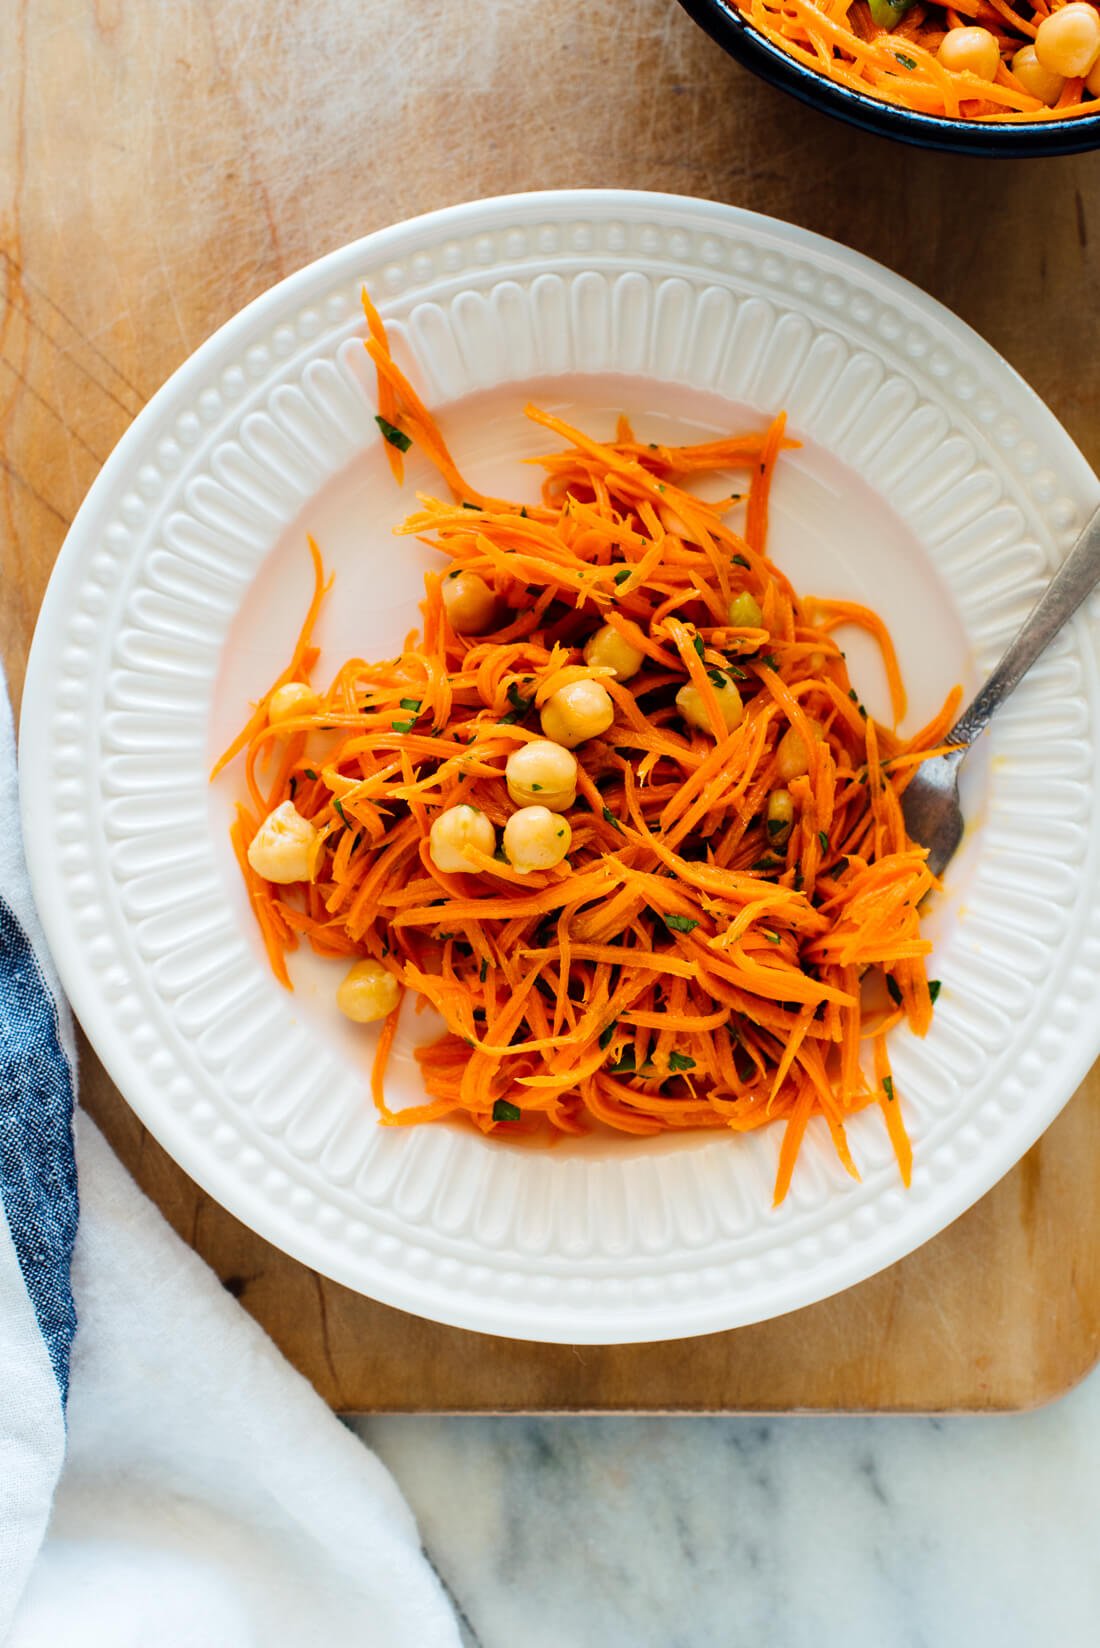 French carrot salad recipe